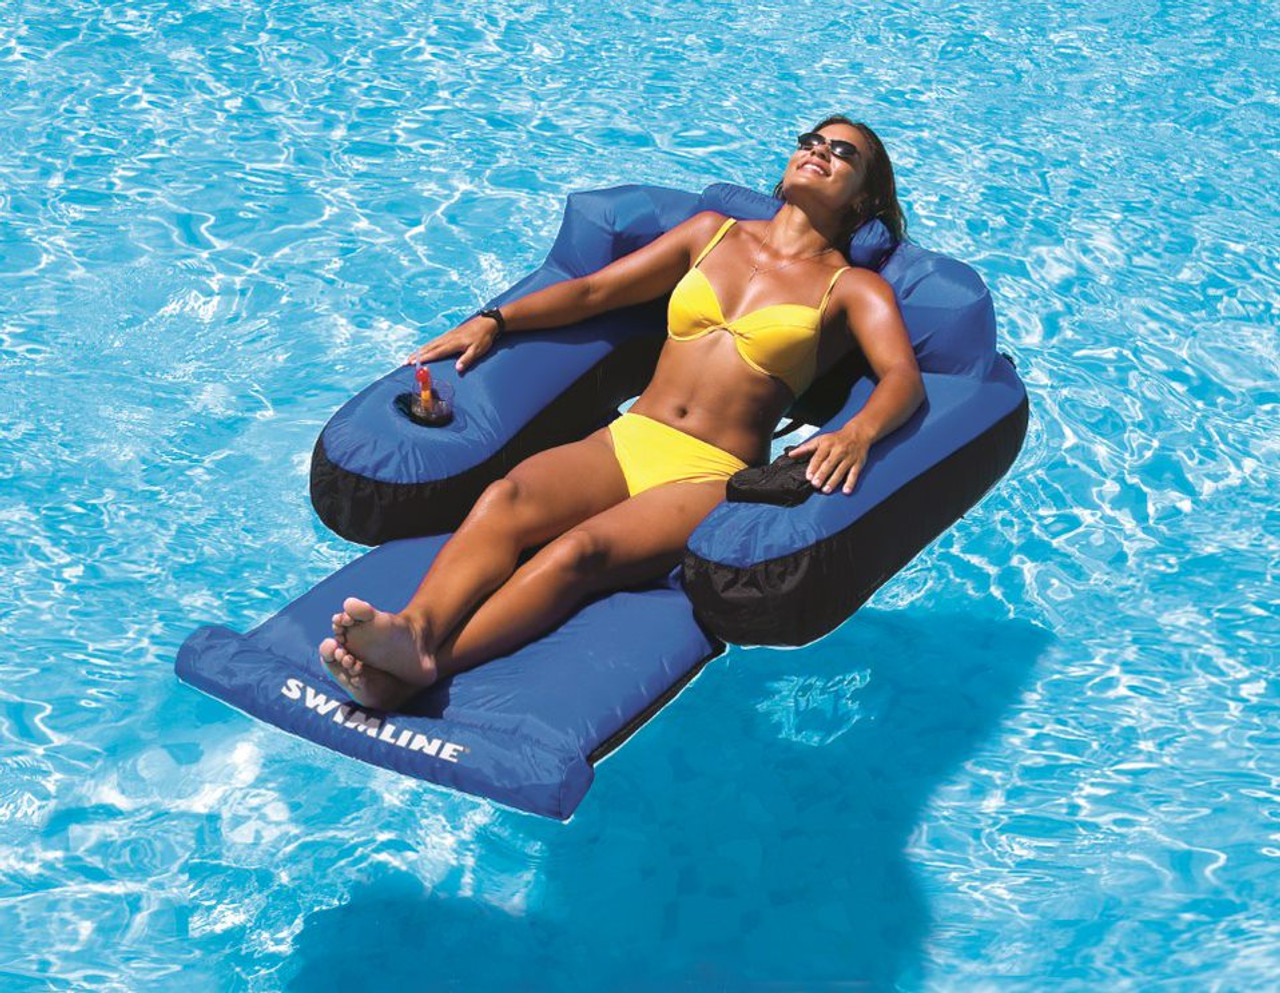 Swimline Fabric Covered Floating Lounger